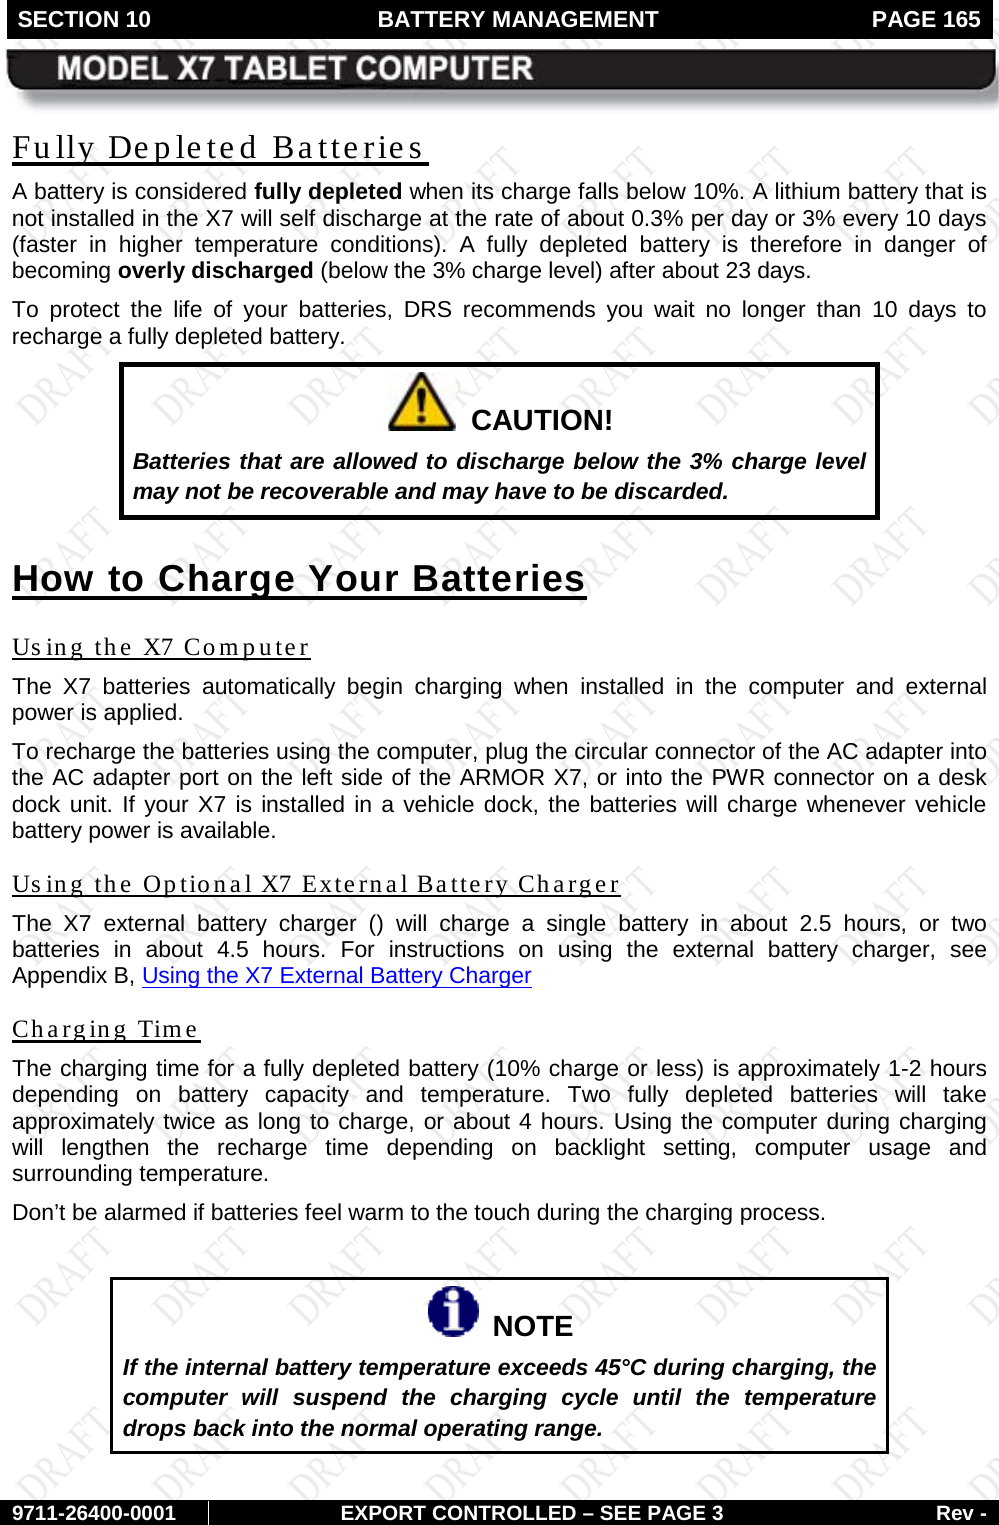 SECTION 10 BATTERY MANAGEMENT  PAGE 165        9711-26400-0001 EXPORT CONTROLLED – SEE PAGE 3 Rev - Fully Depleted Batteries A battery is considered fully depleted when its charge falls below 10%. A lithium battery that is not installed in the X7 will self discharge at the rate of about 0.3% per day or 3% every 10 days (faster in higher temperature conditions). A fully  depleted battery is therefore  in danger of becoming overly discharged (below the 3% charge level) after about 23 days.  To protect the life of your batteries, DRS recommends you wait no longer than 10 days to recharge a fully depleted battery.   CAUTION! Batteries that are allowed to discharge below the 3% charge level may not be recoverable and may have to be discarded. How to Charge Your Batteries Using the X7 Computer The  X7 batteries automatically begin charging when installed in the computer and  external power is applied.  To recharge the batteries using the computer, plug the circular connector of the AC adapter into the AC adapter port on the left side of the ARMOR X7, or into the PWR connector on a desk dock unit. If your X7 is installed in a vehicle dock, the batteries will charge whenever vehicle battery power is available.  Using the Optional X7 External Battery Charger The X7 external battery charger () will charge a single battery in about 2.5 hours, or two batteries in about 4.5 hours. For instructions on using the external battery charger, see Appendix B, Using the X7 External Battery Charger  Charging Time The charging time for a fully depleted battery (10% charge or less) is approximately 1-2 hours depending on battery capacity and temperature. Two fully depleted batteries will take approximately twice as long to charge, or about 4 hours. Using the computer during charging will lengthen the recharge time depending on backlight setting, computer usage and surrounding temperature.  Don’t be alarmed if batteries feel warm to the touch during the charging process.    NOTE If the internal battery temperature exceeds 45°C during charging, the computer will suspend the charging cycle until the temperature drops back into the normal operating range.   